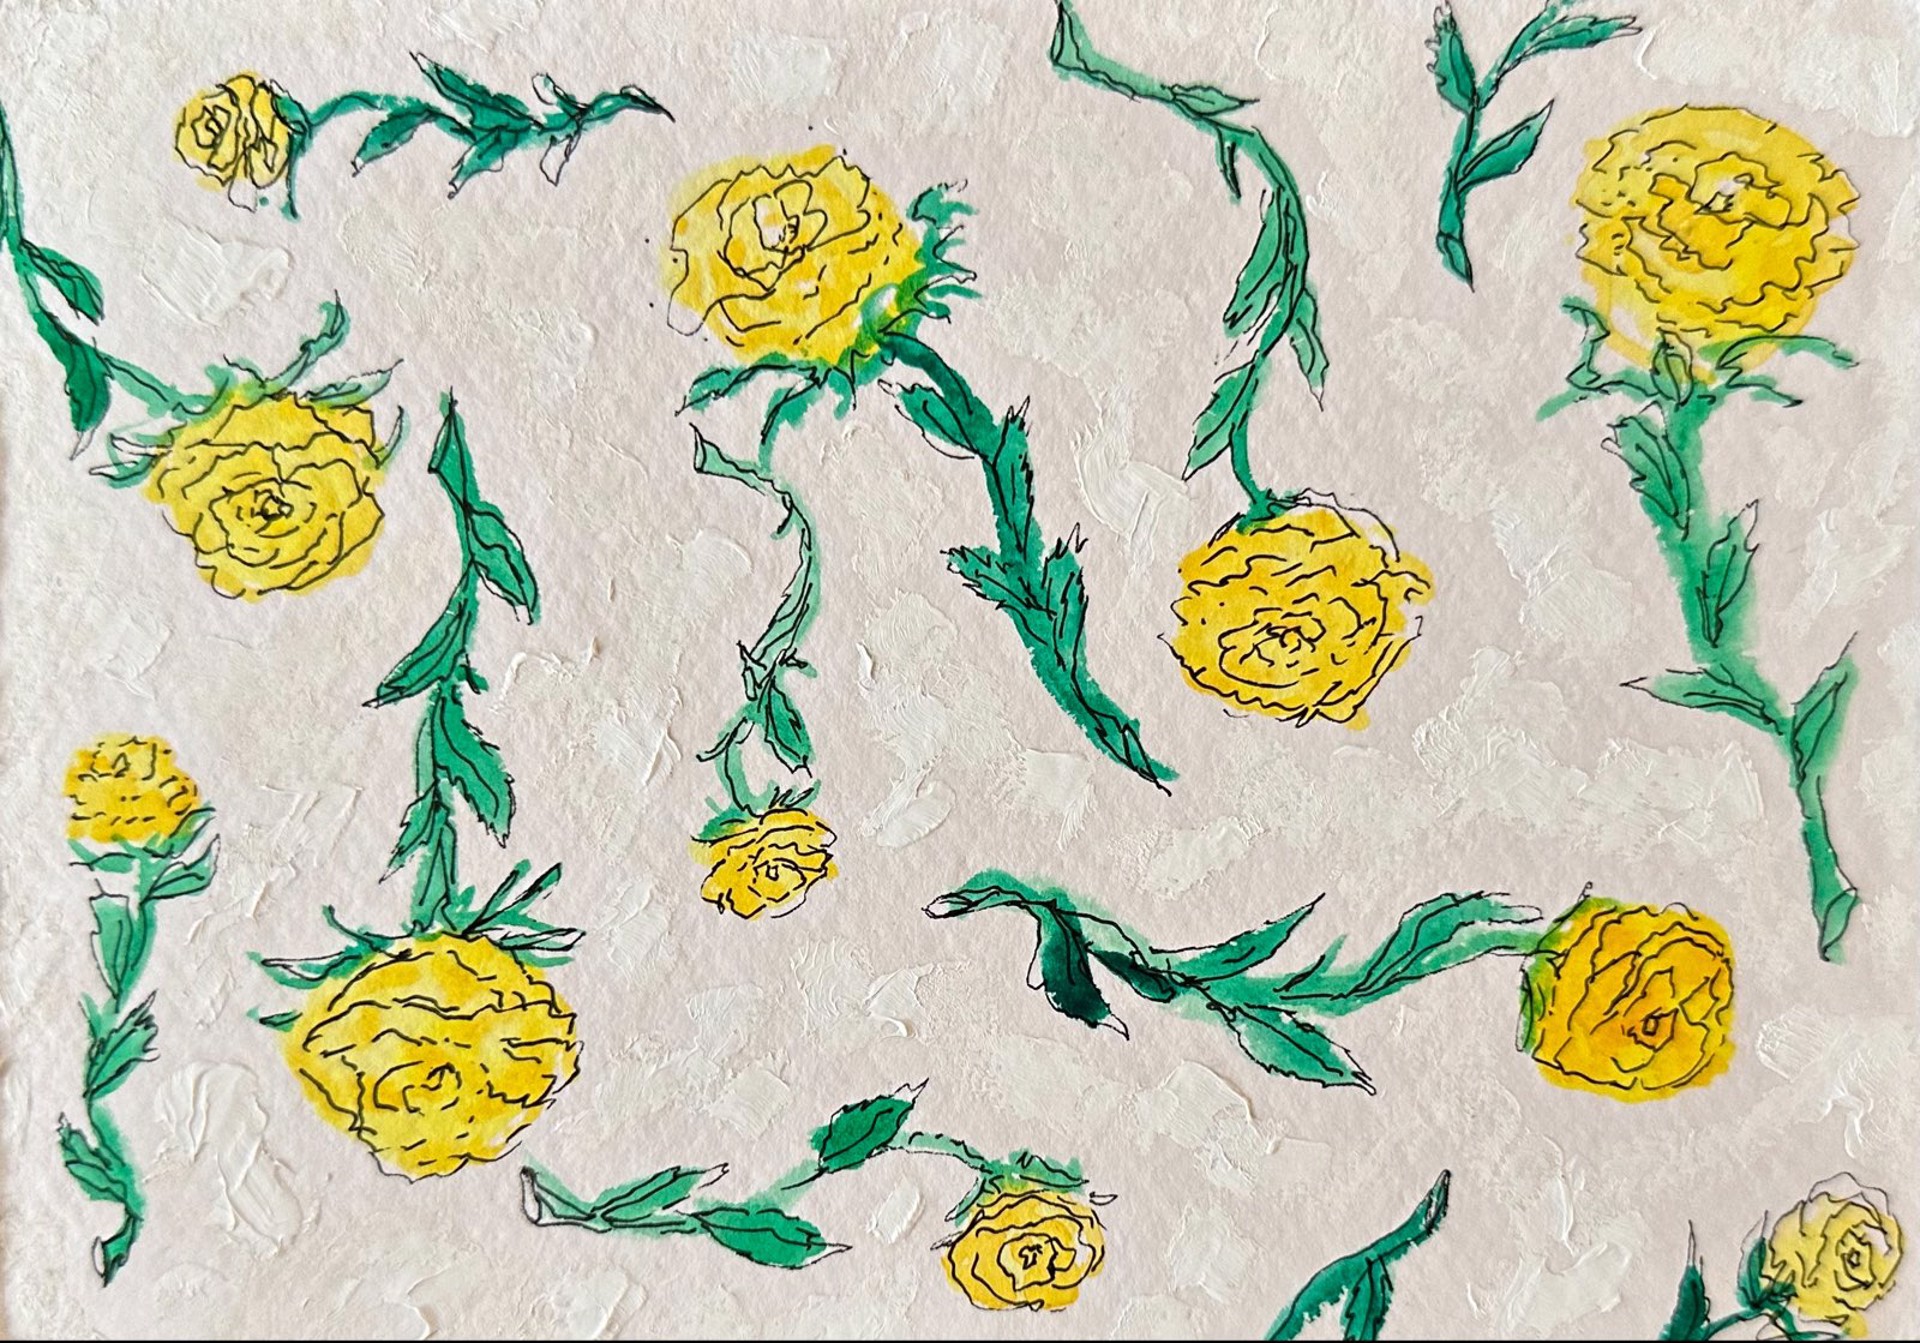 Florals In Yellow 2, matted by Mary Bragg